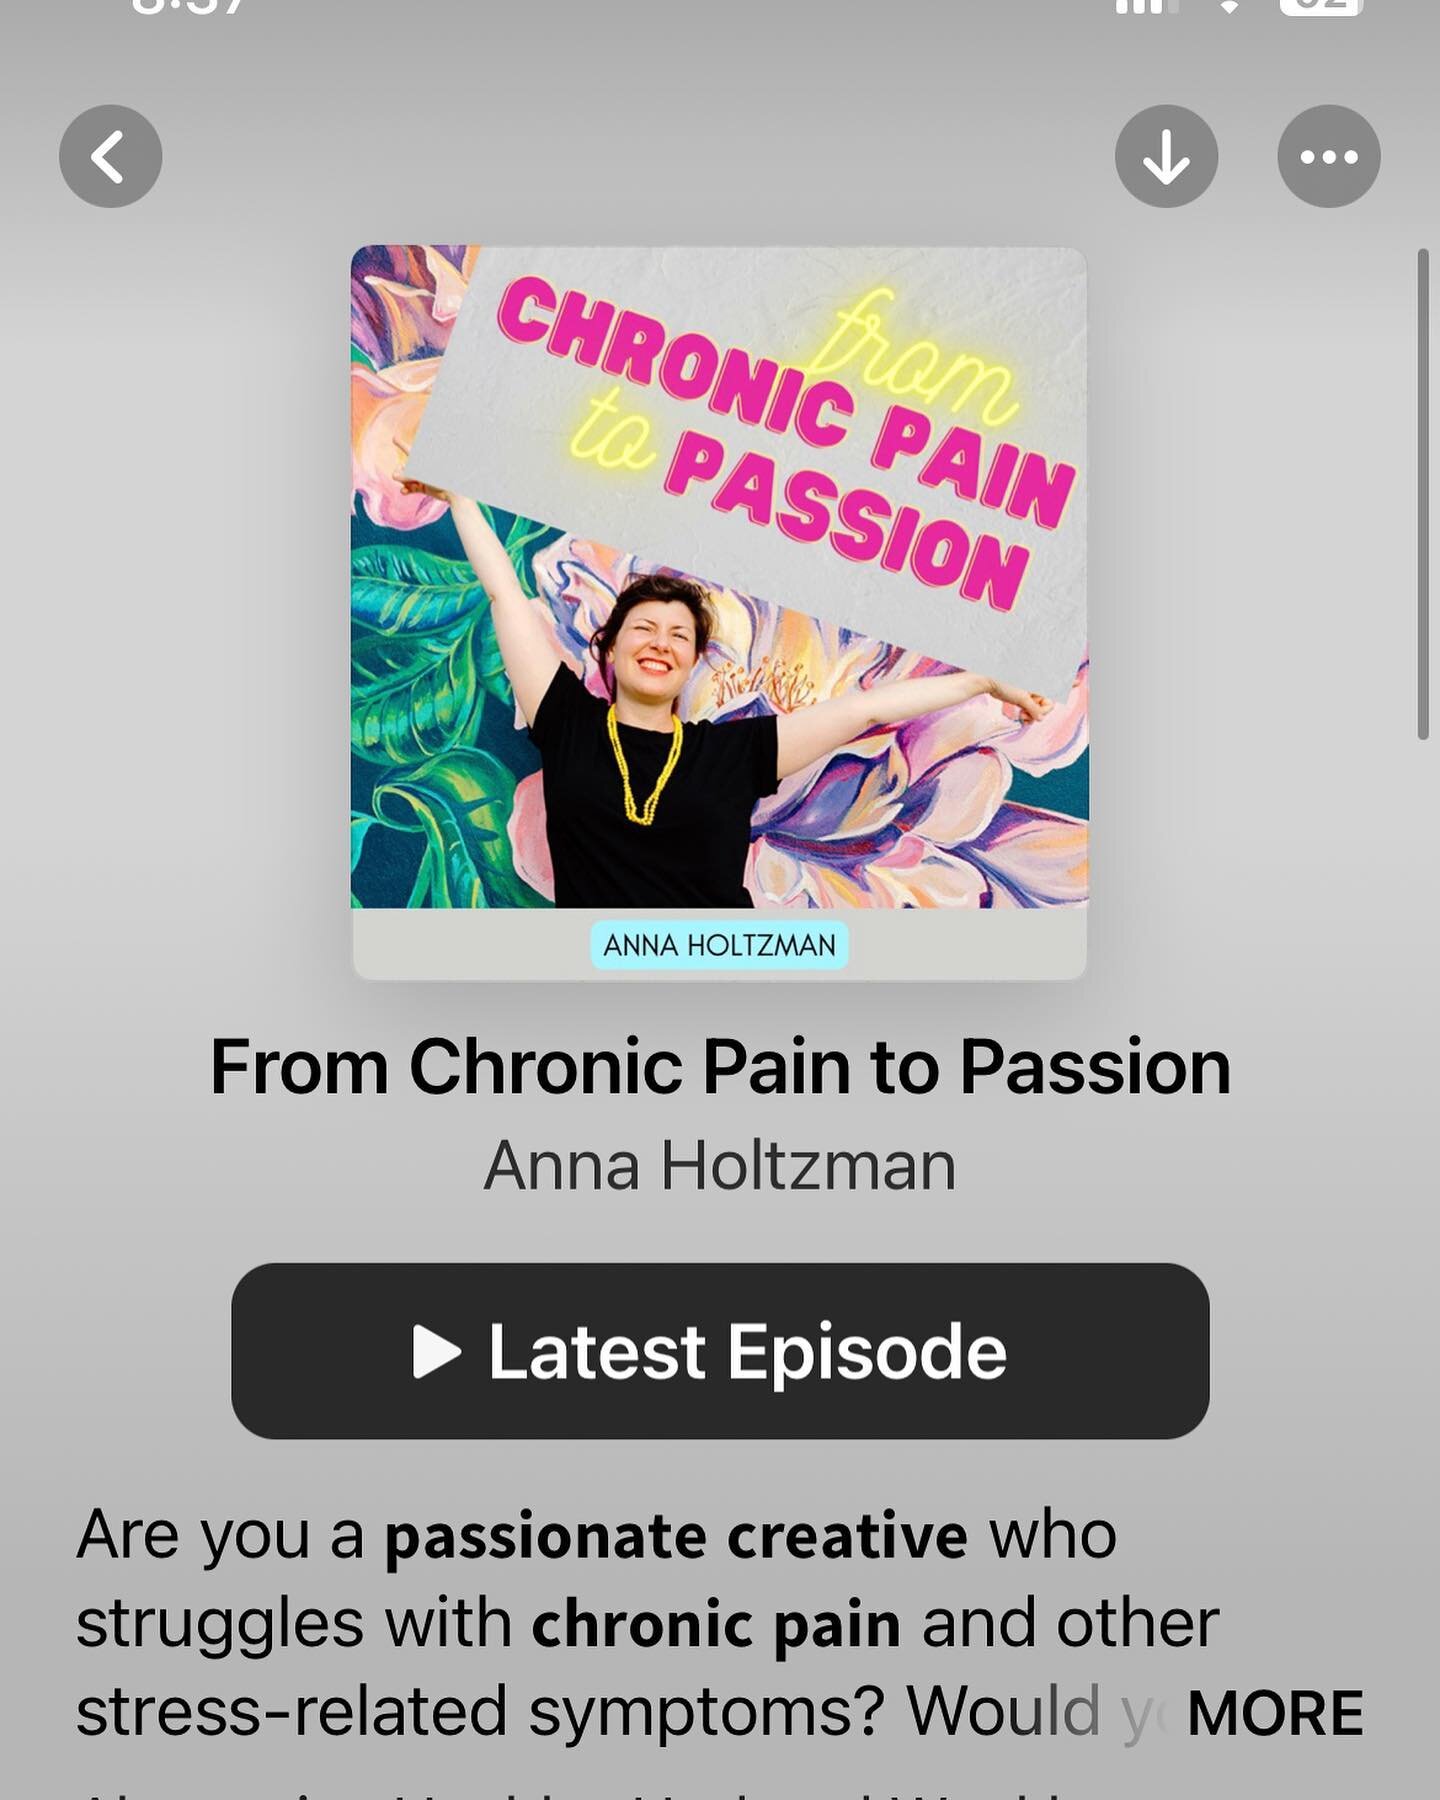 Stop what you&rsquo;re doing and go check out this new podcast! If you are a creative person who also suffers from chronic pain, Anna is seriously talented and educated in this realm of work. She&rsquo;s not only a dear friend of mine, but a seriousl